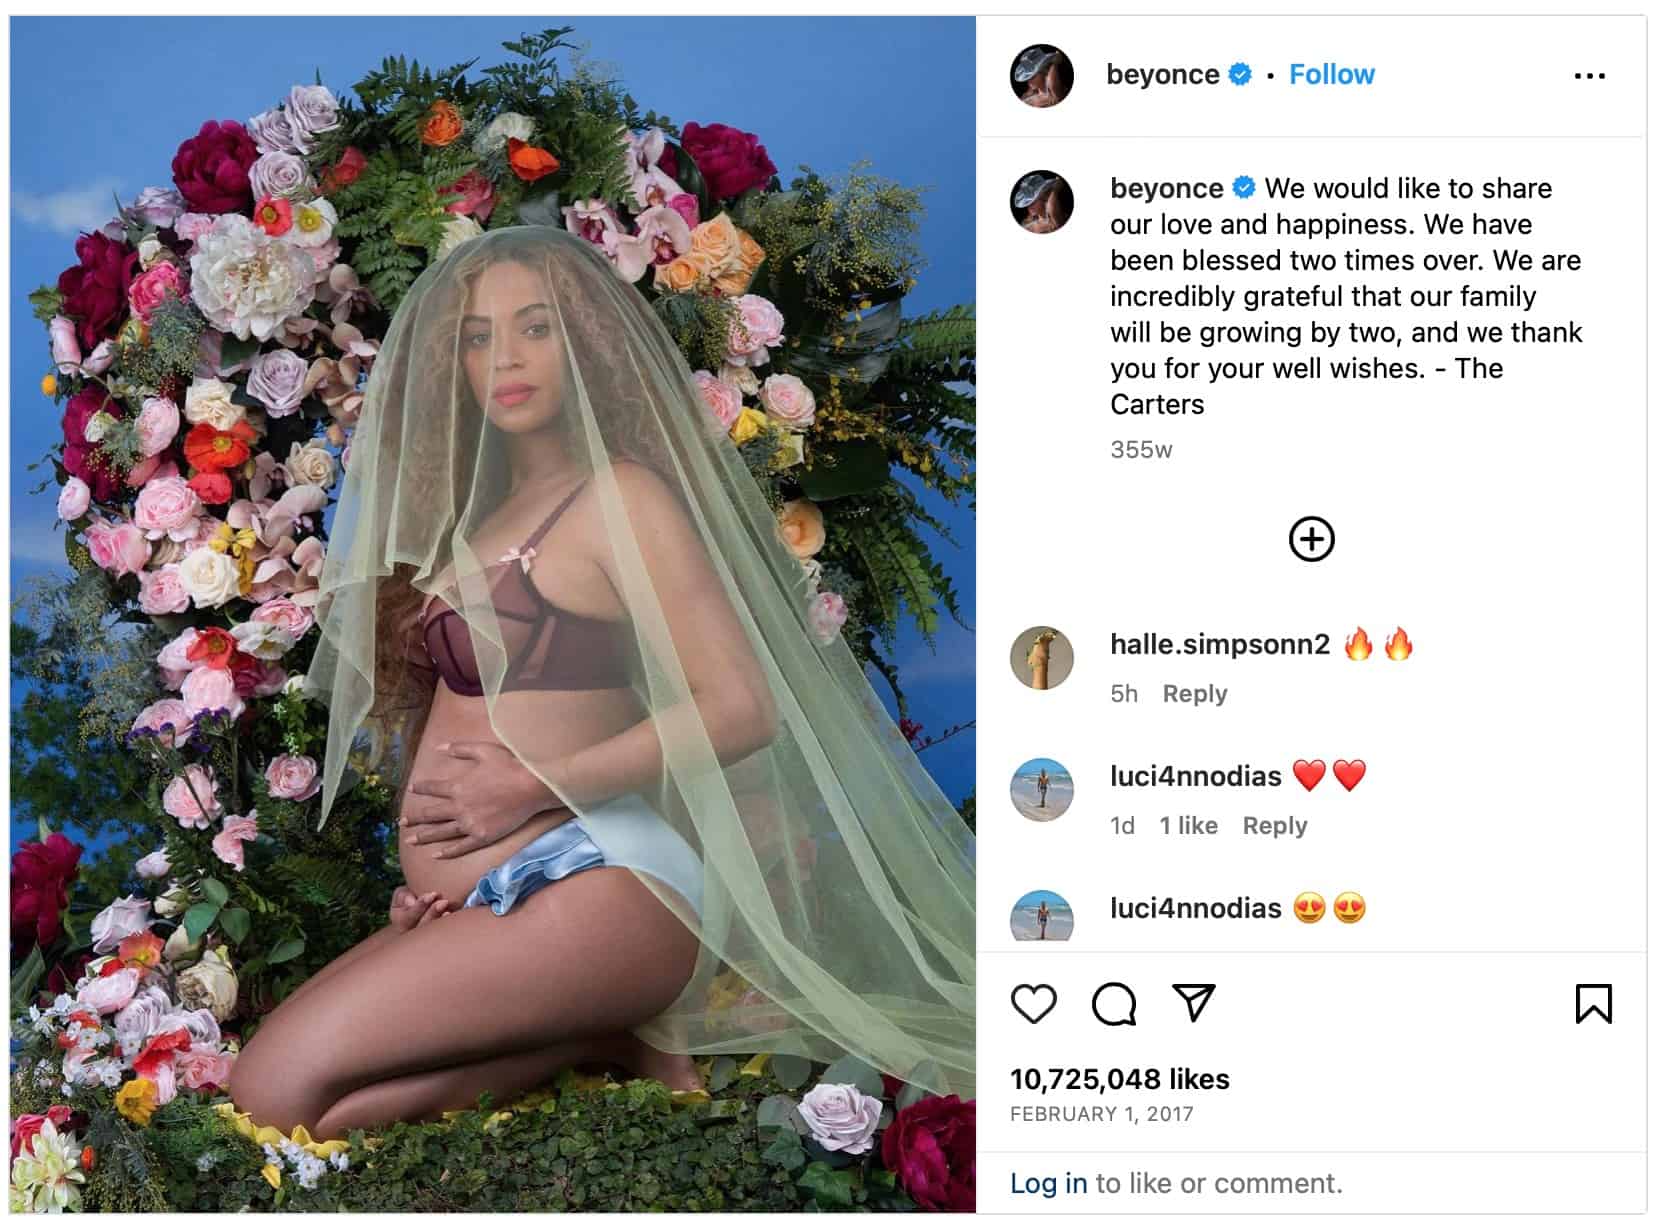 Beyonce announced the birth of her twins on social media.